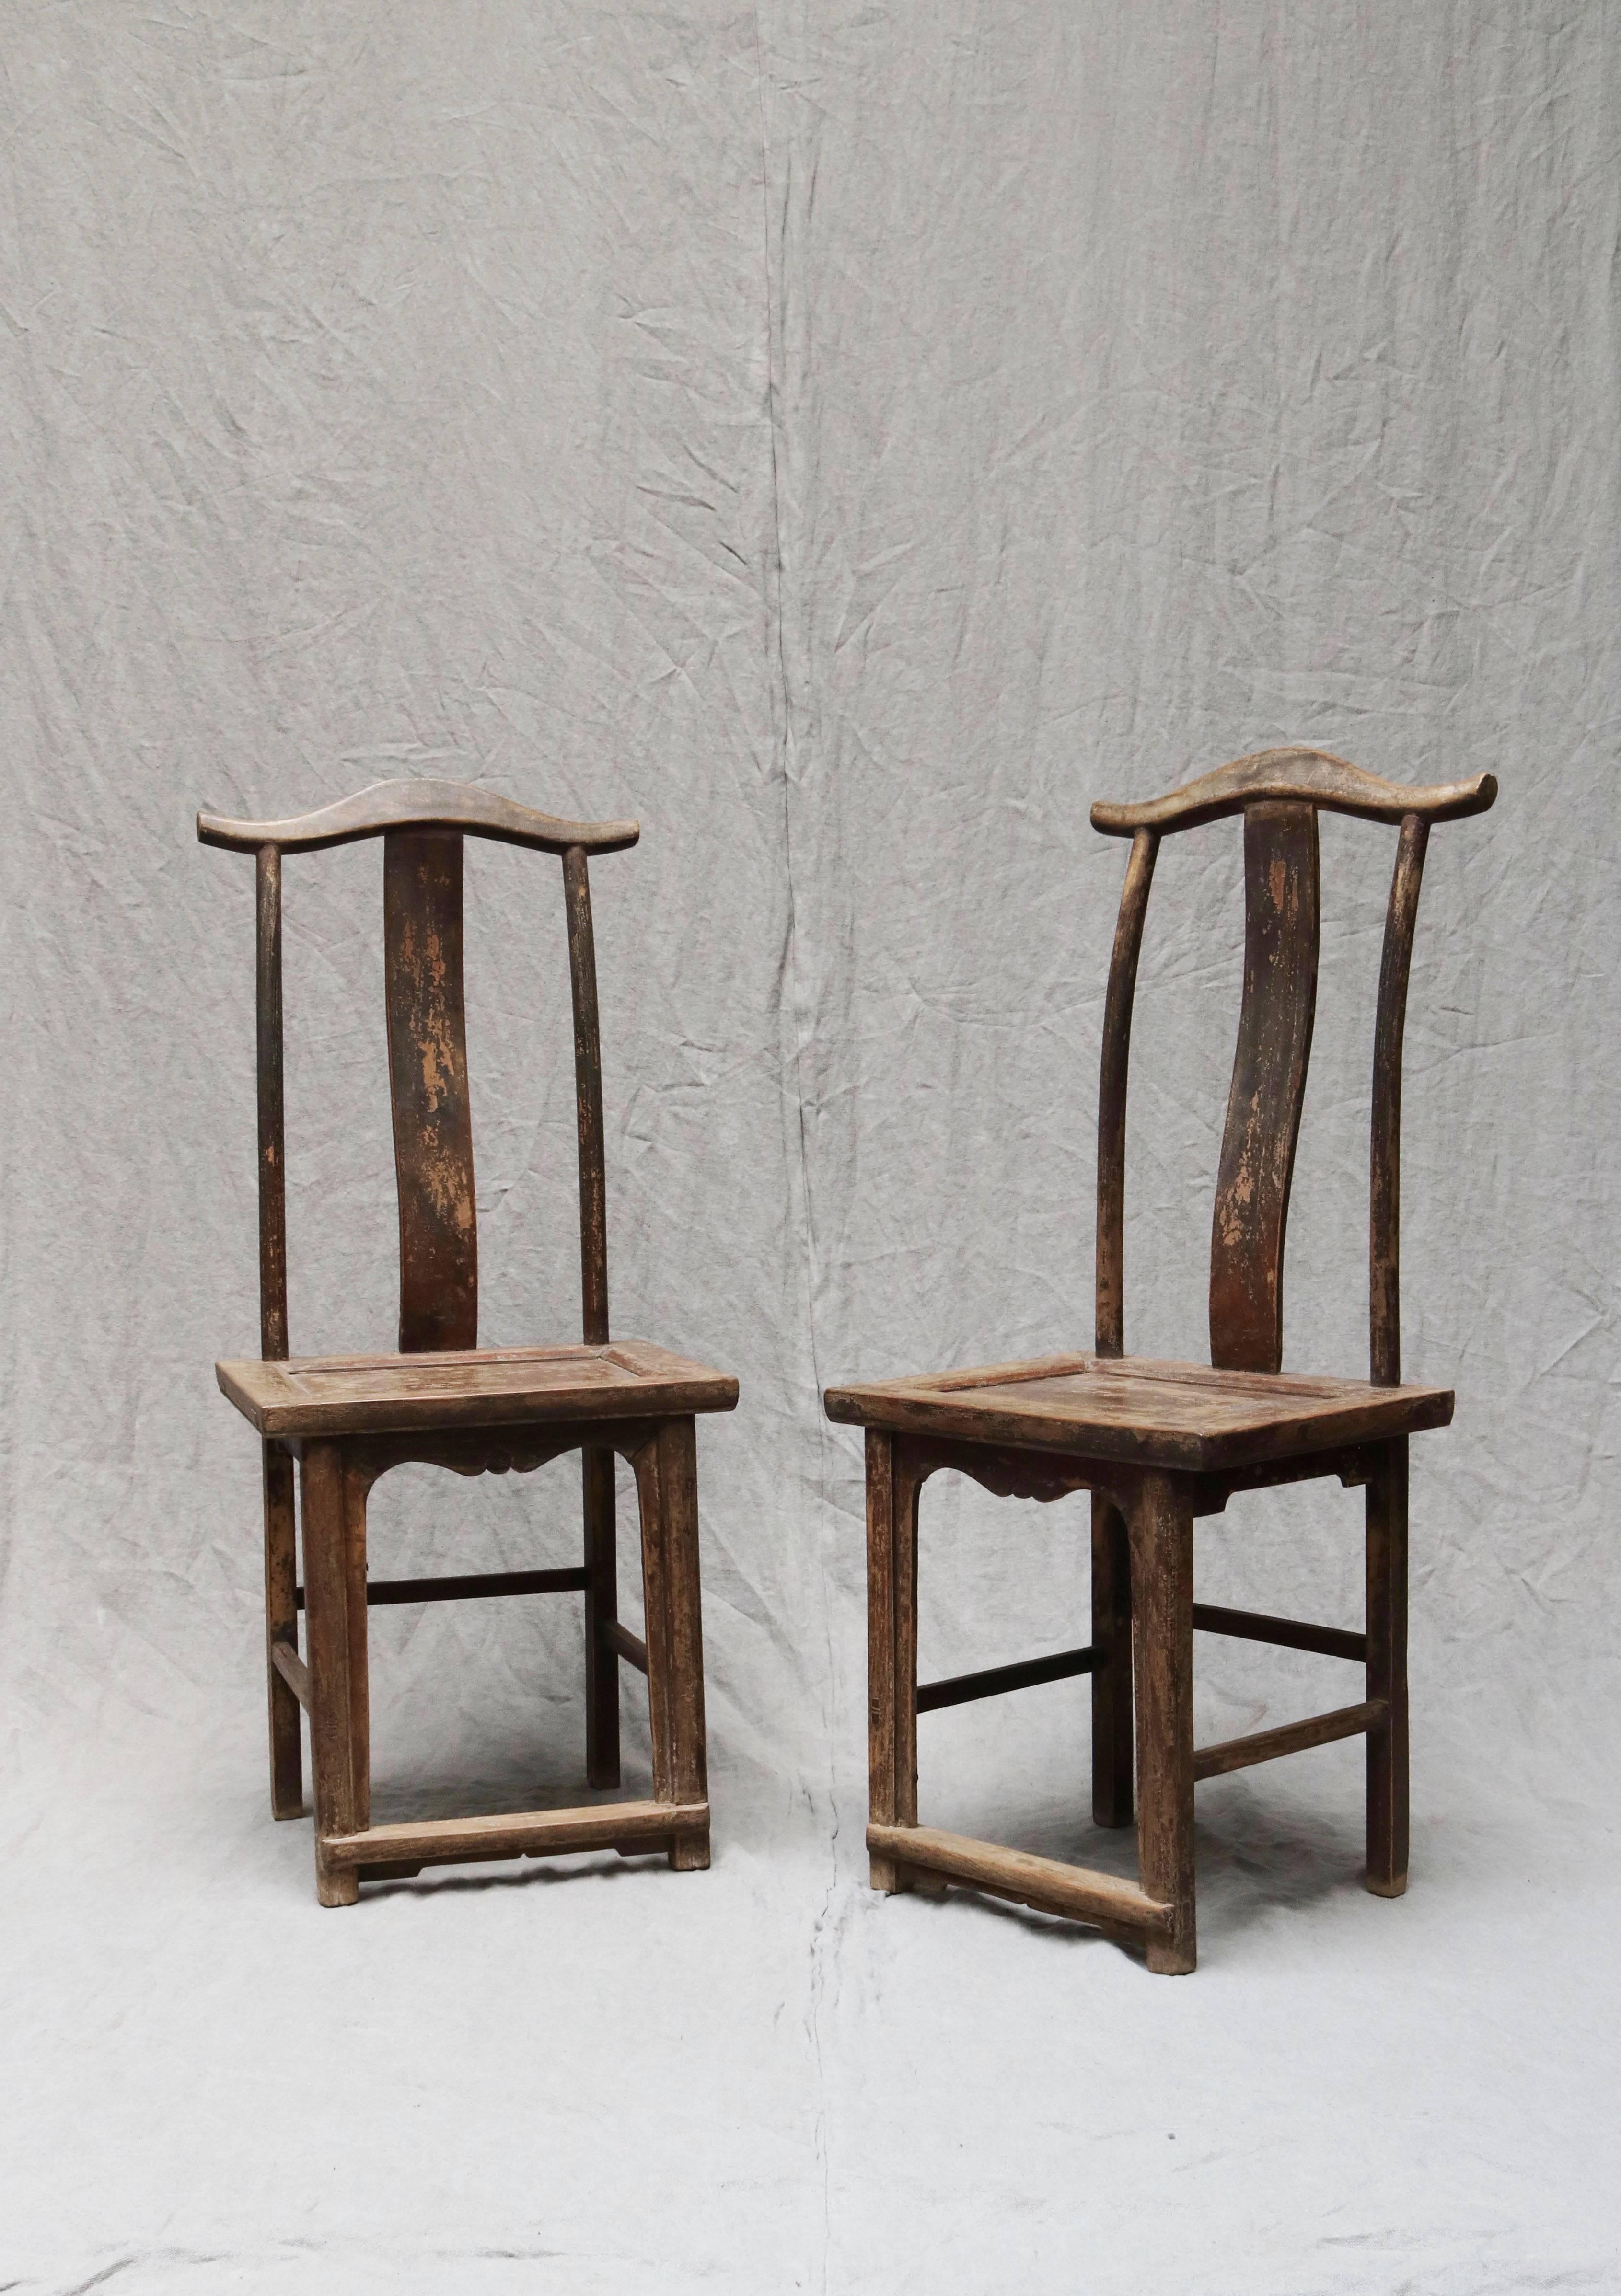 Chinese stools made in ancient elmwood from the 19th century collected from the Shanxi Province. The stools are unique due to their exceptional color and beautiful patina.
 